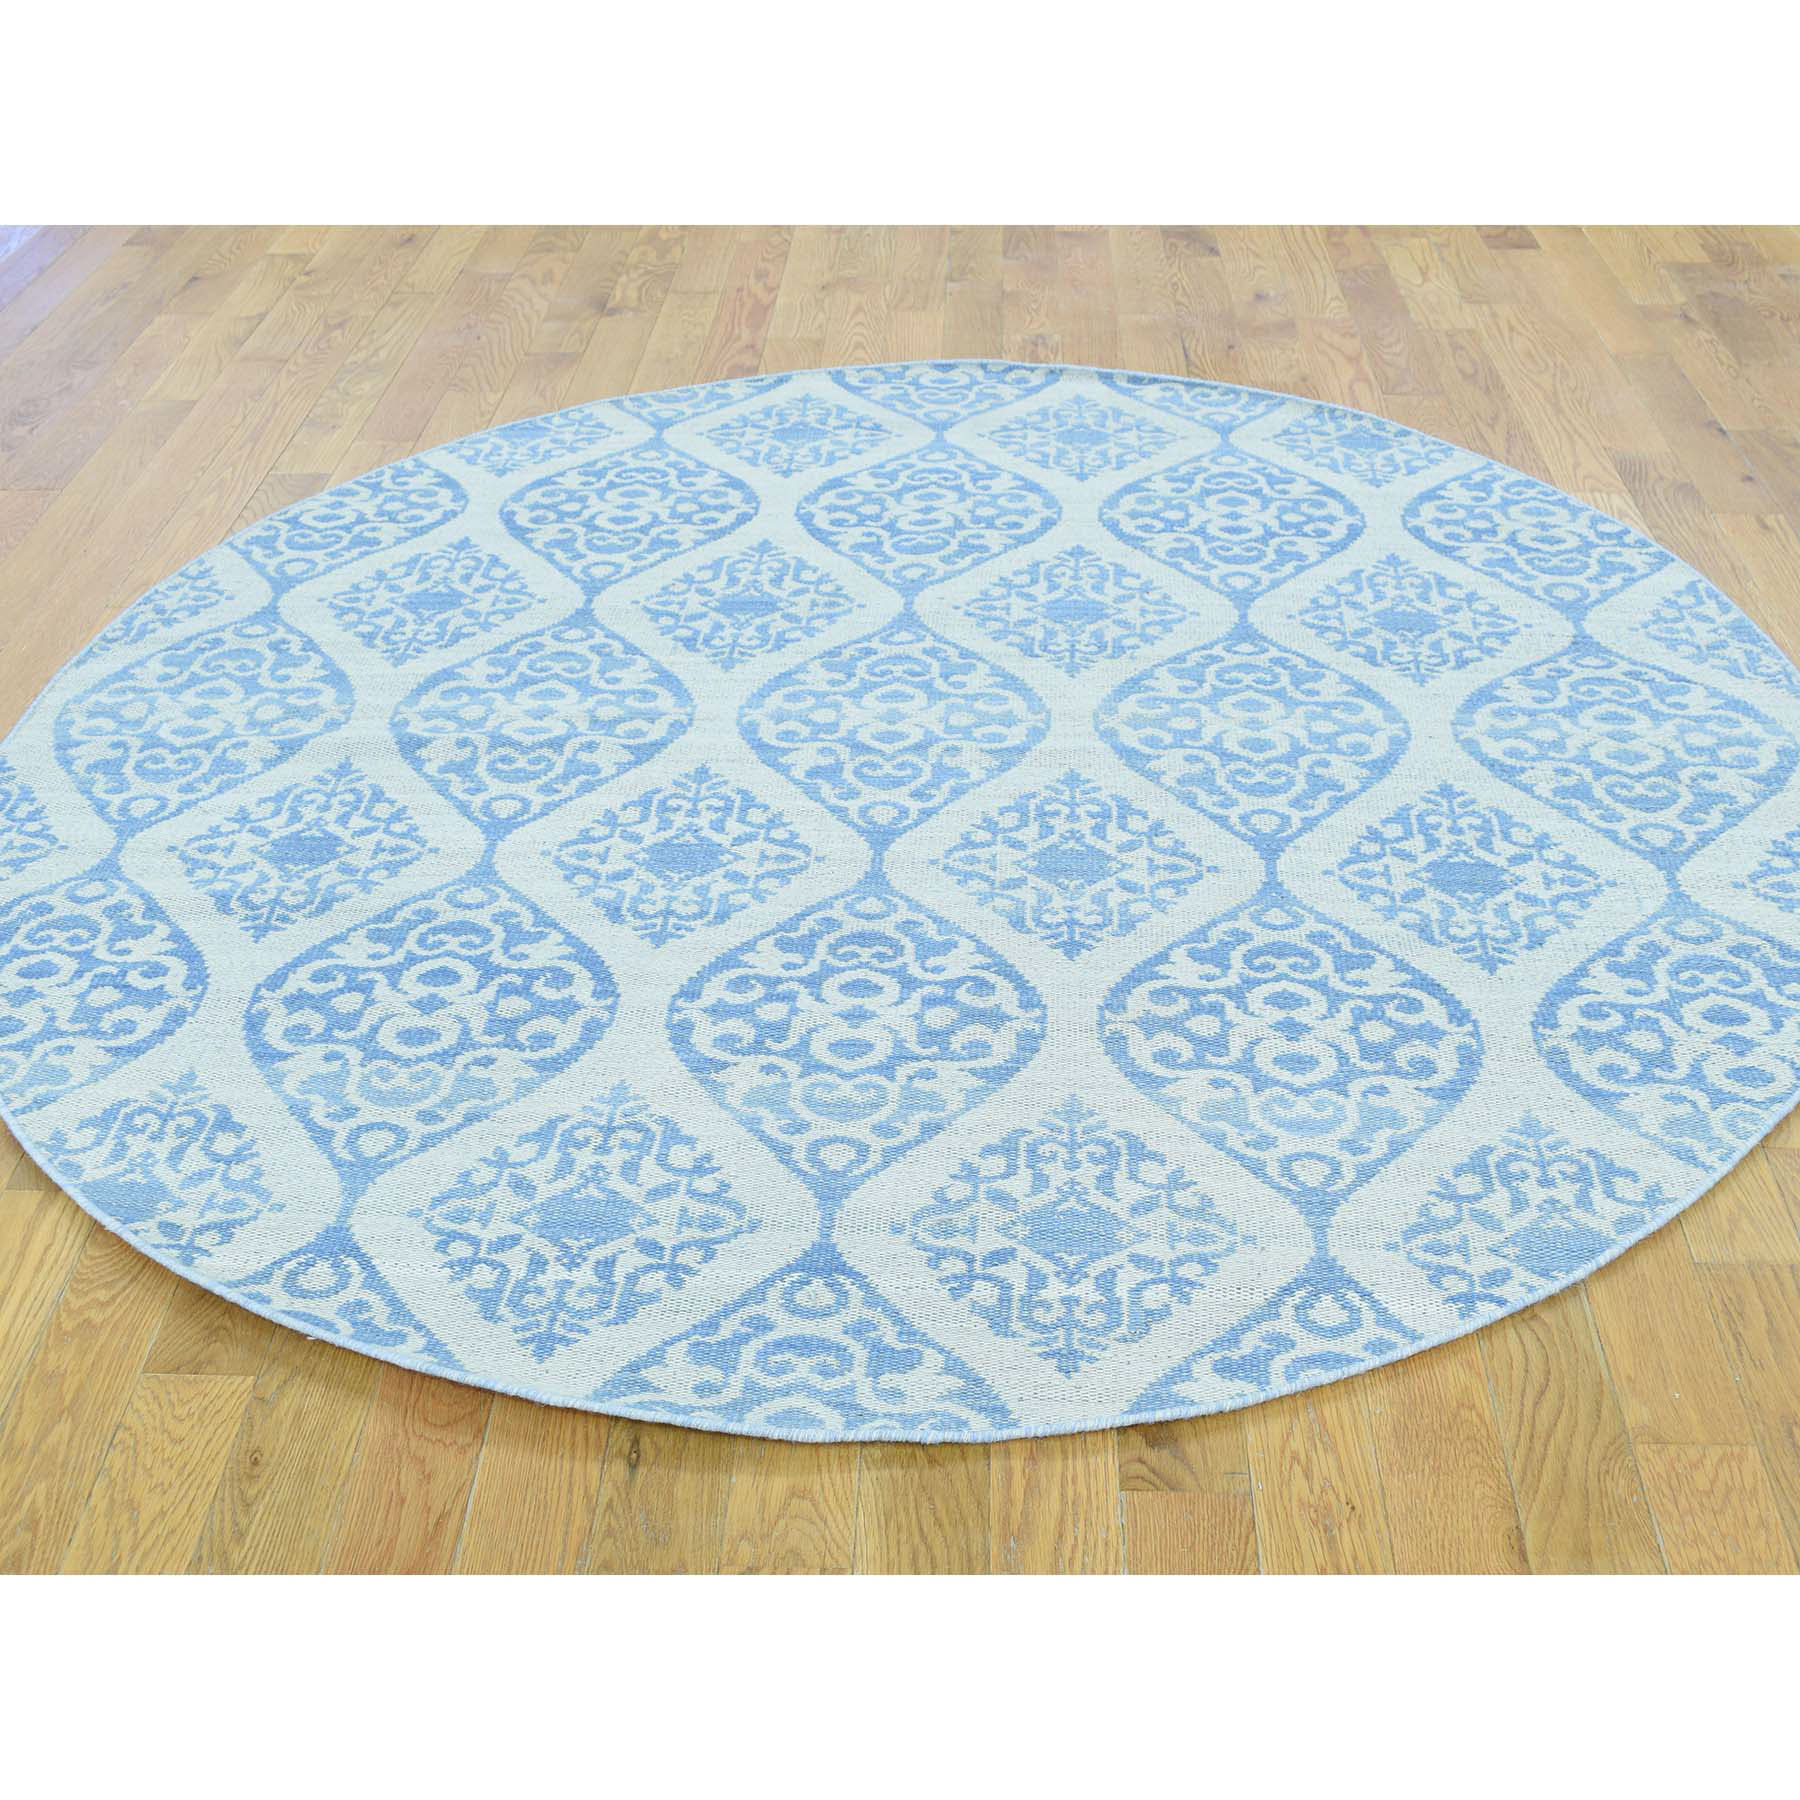 6-x6- Reversible Flat Weave Round Hand Woven Durie Kilim Rug 